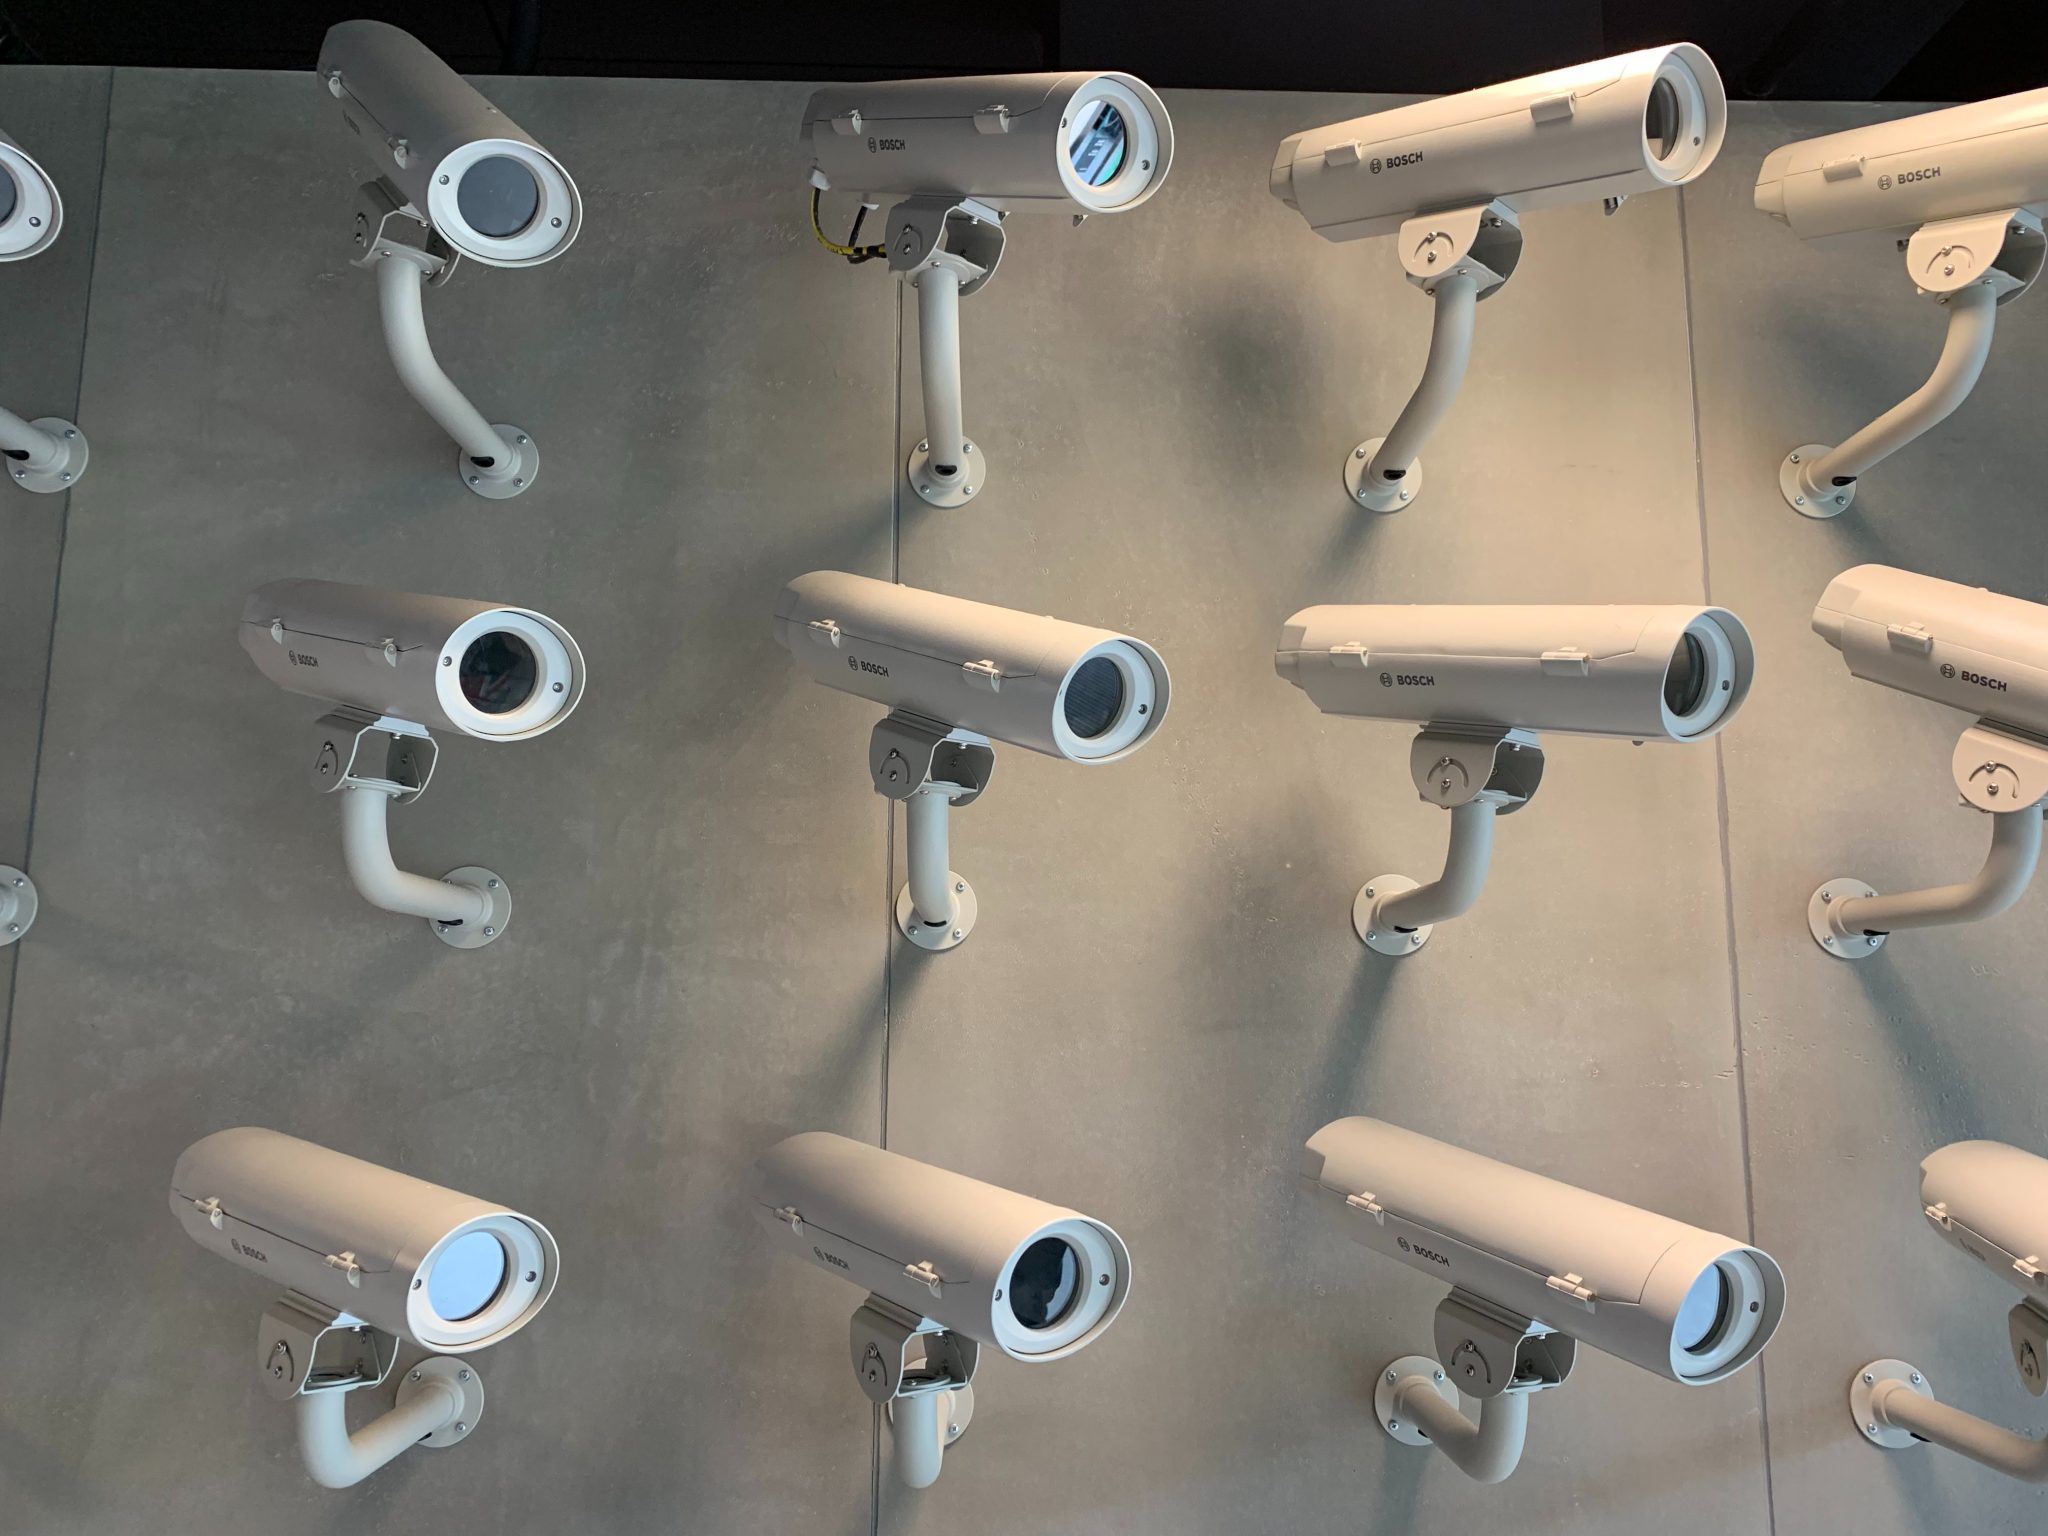 Choosing The Right CCTV For You